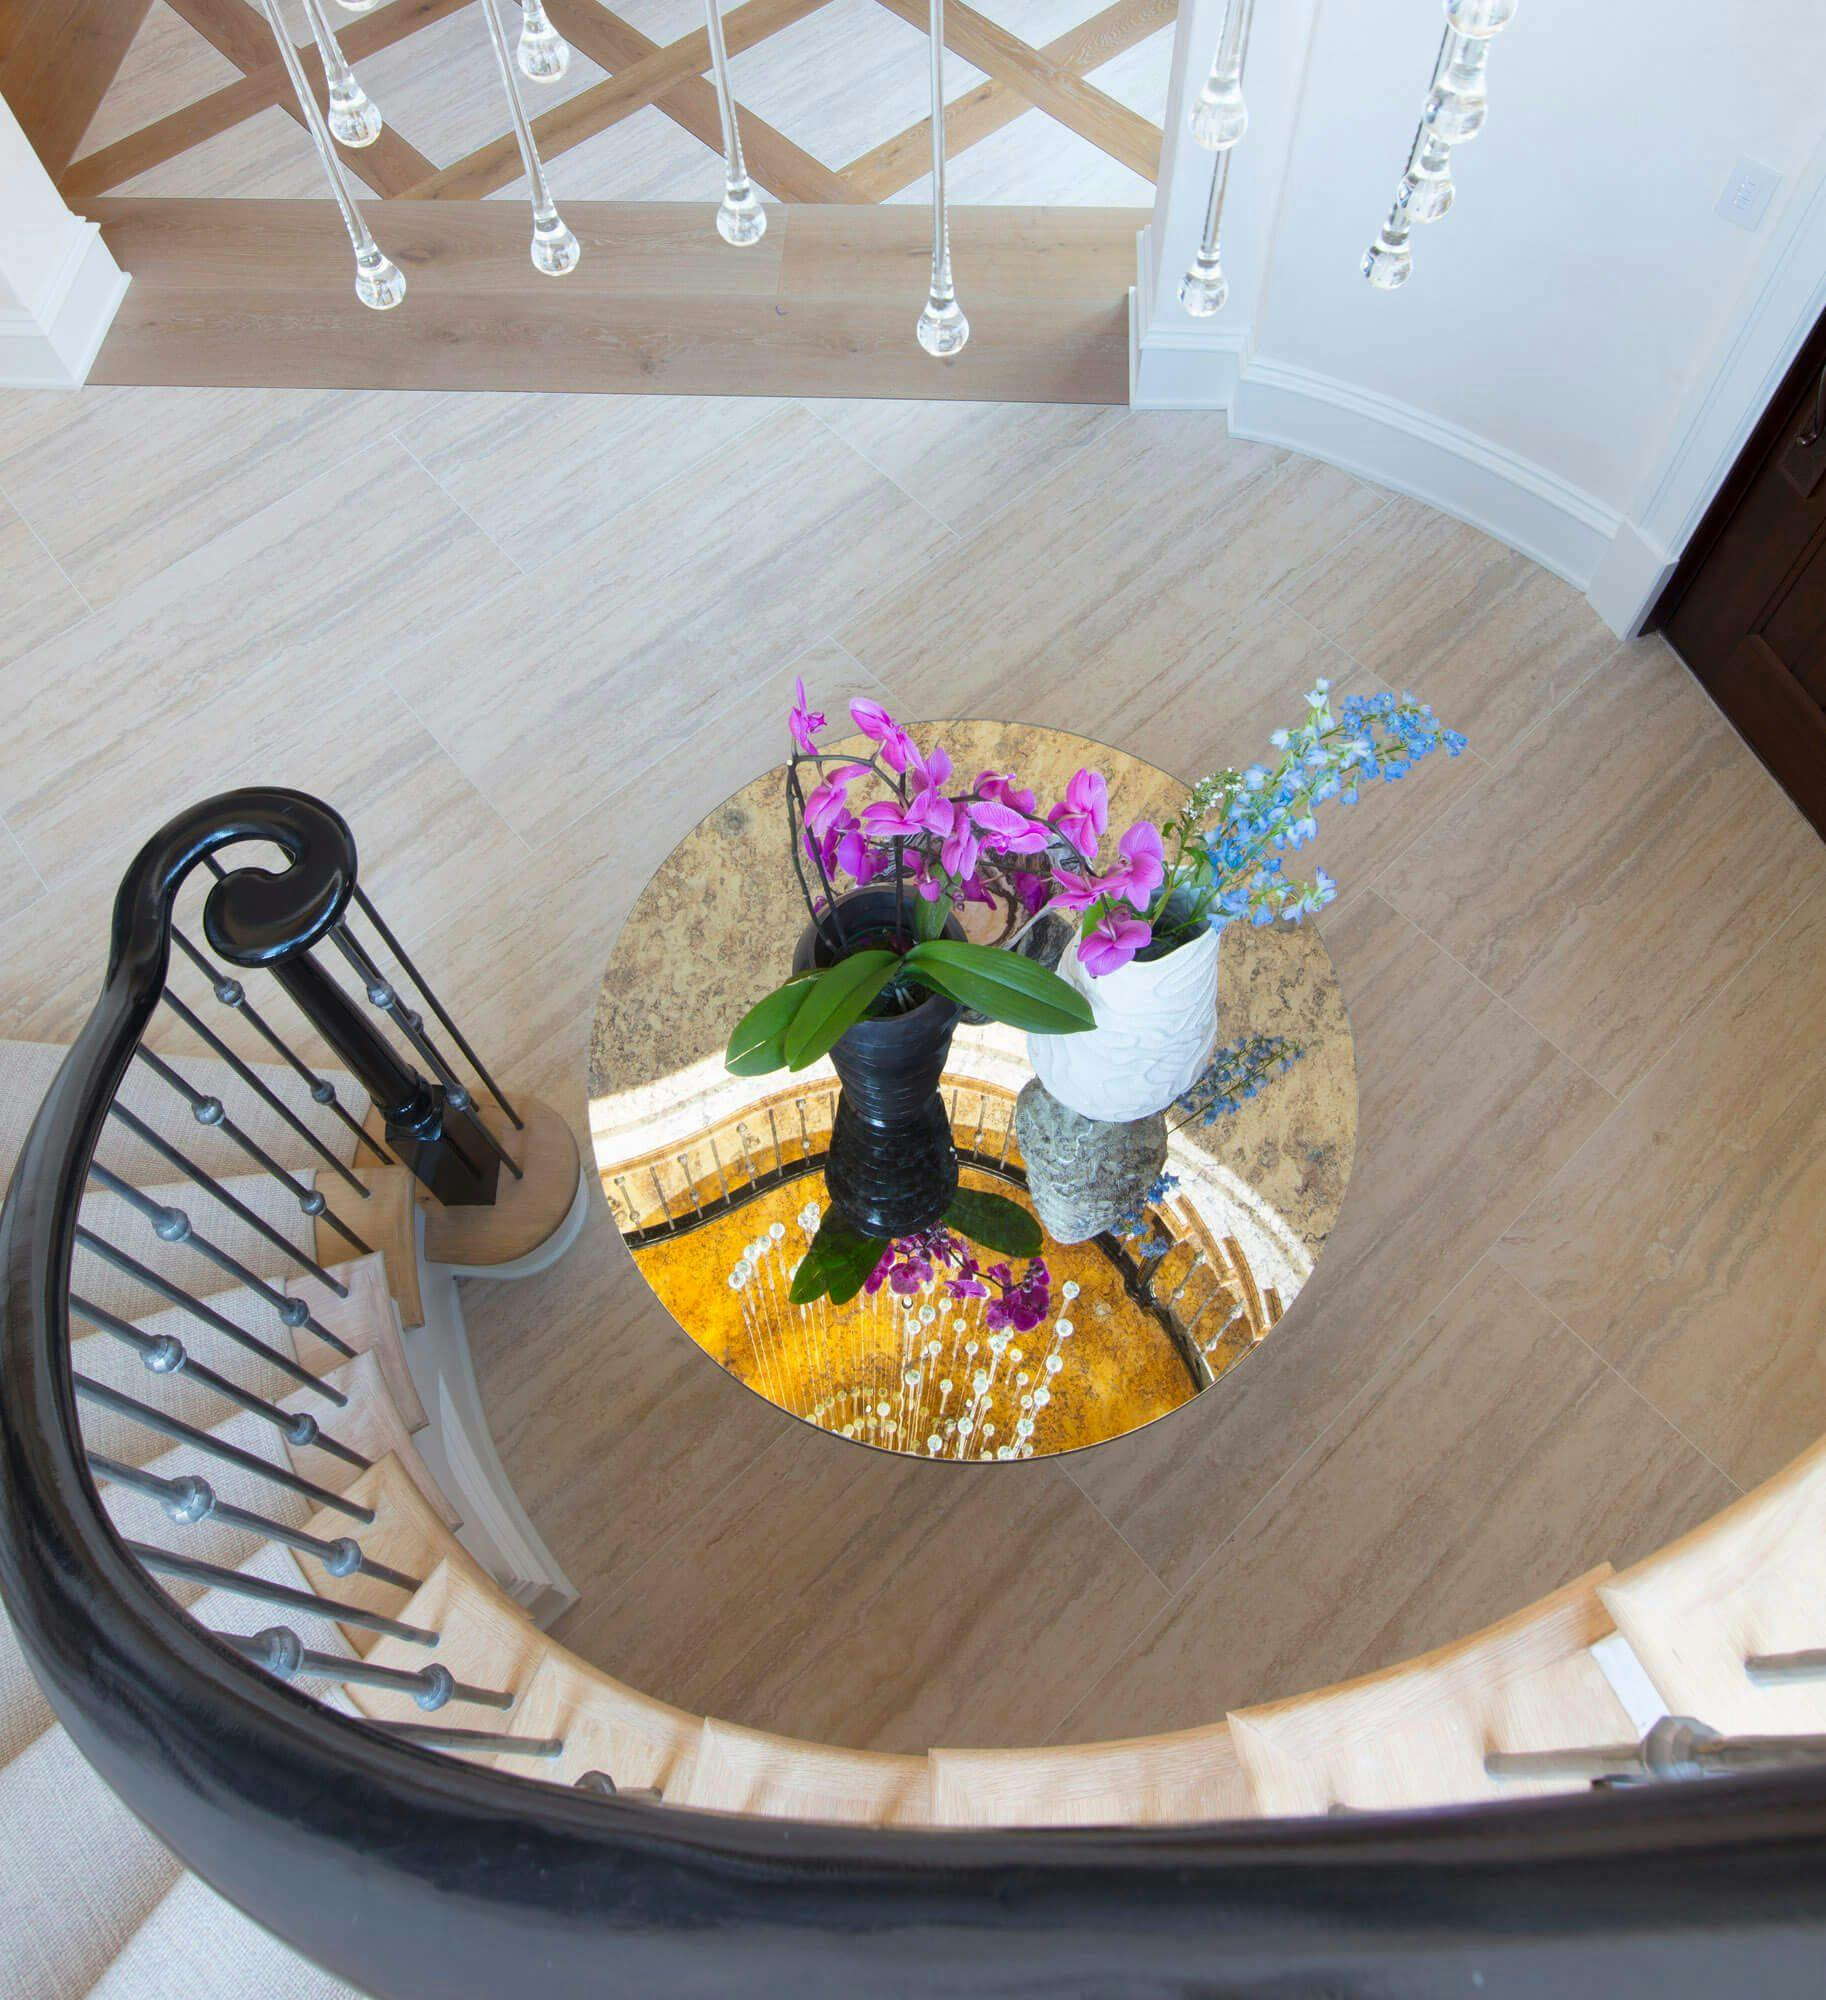 top view of a spiral staircase onto a reflective table with pink and blue flowers